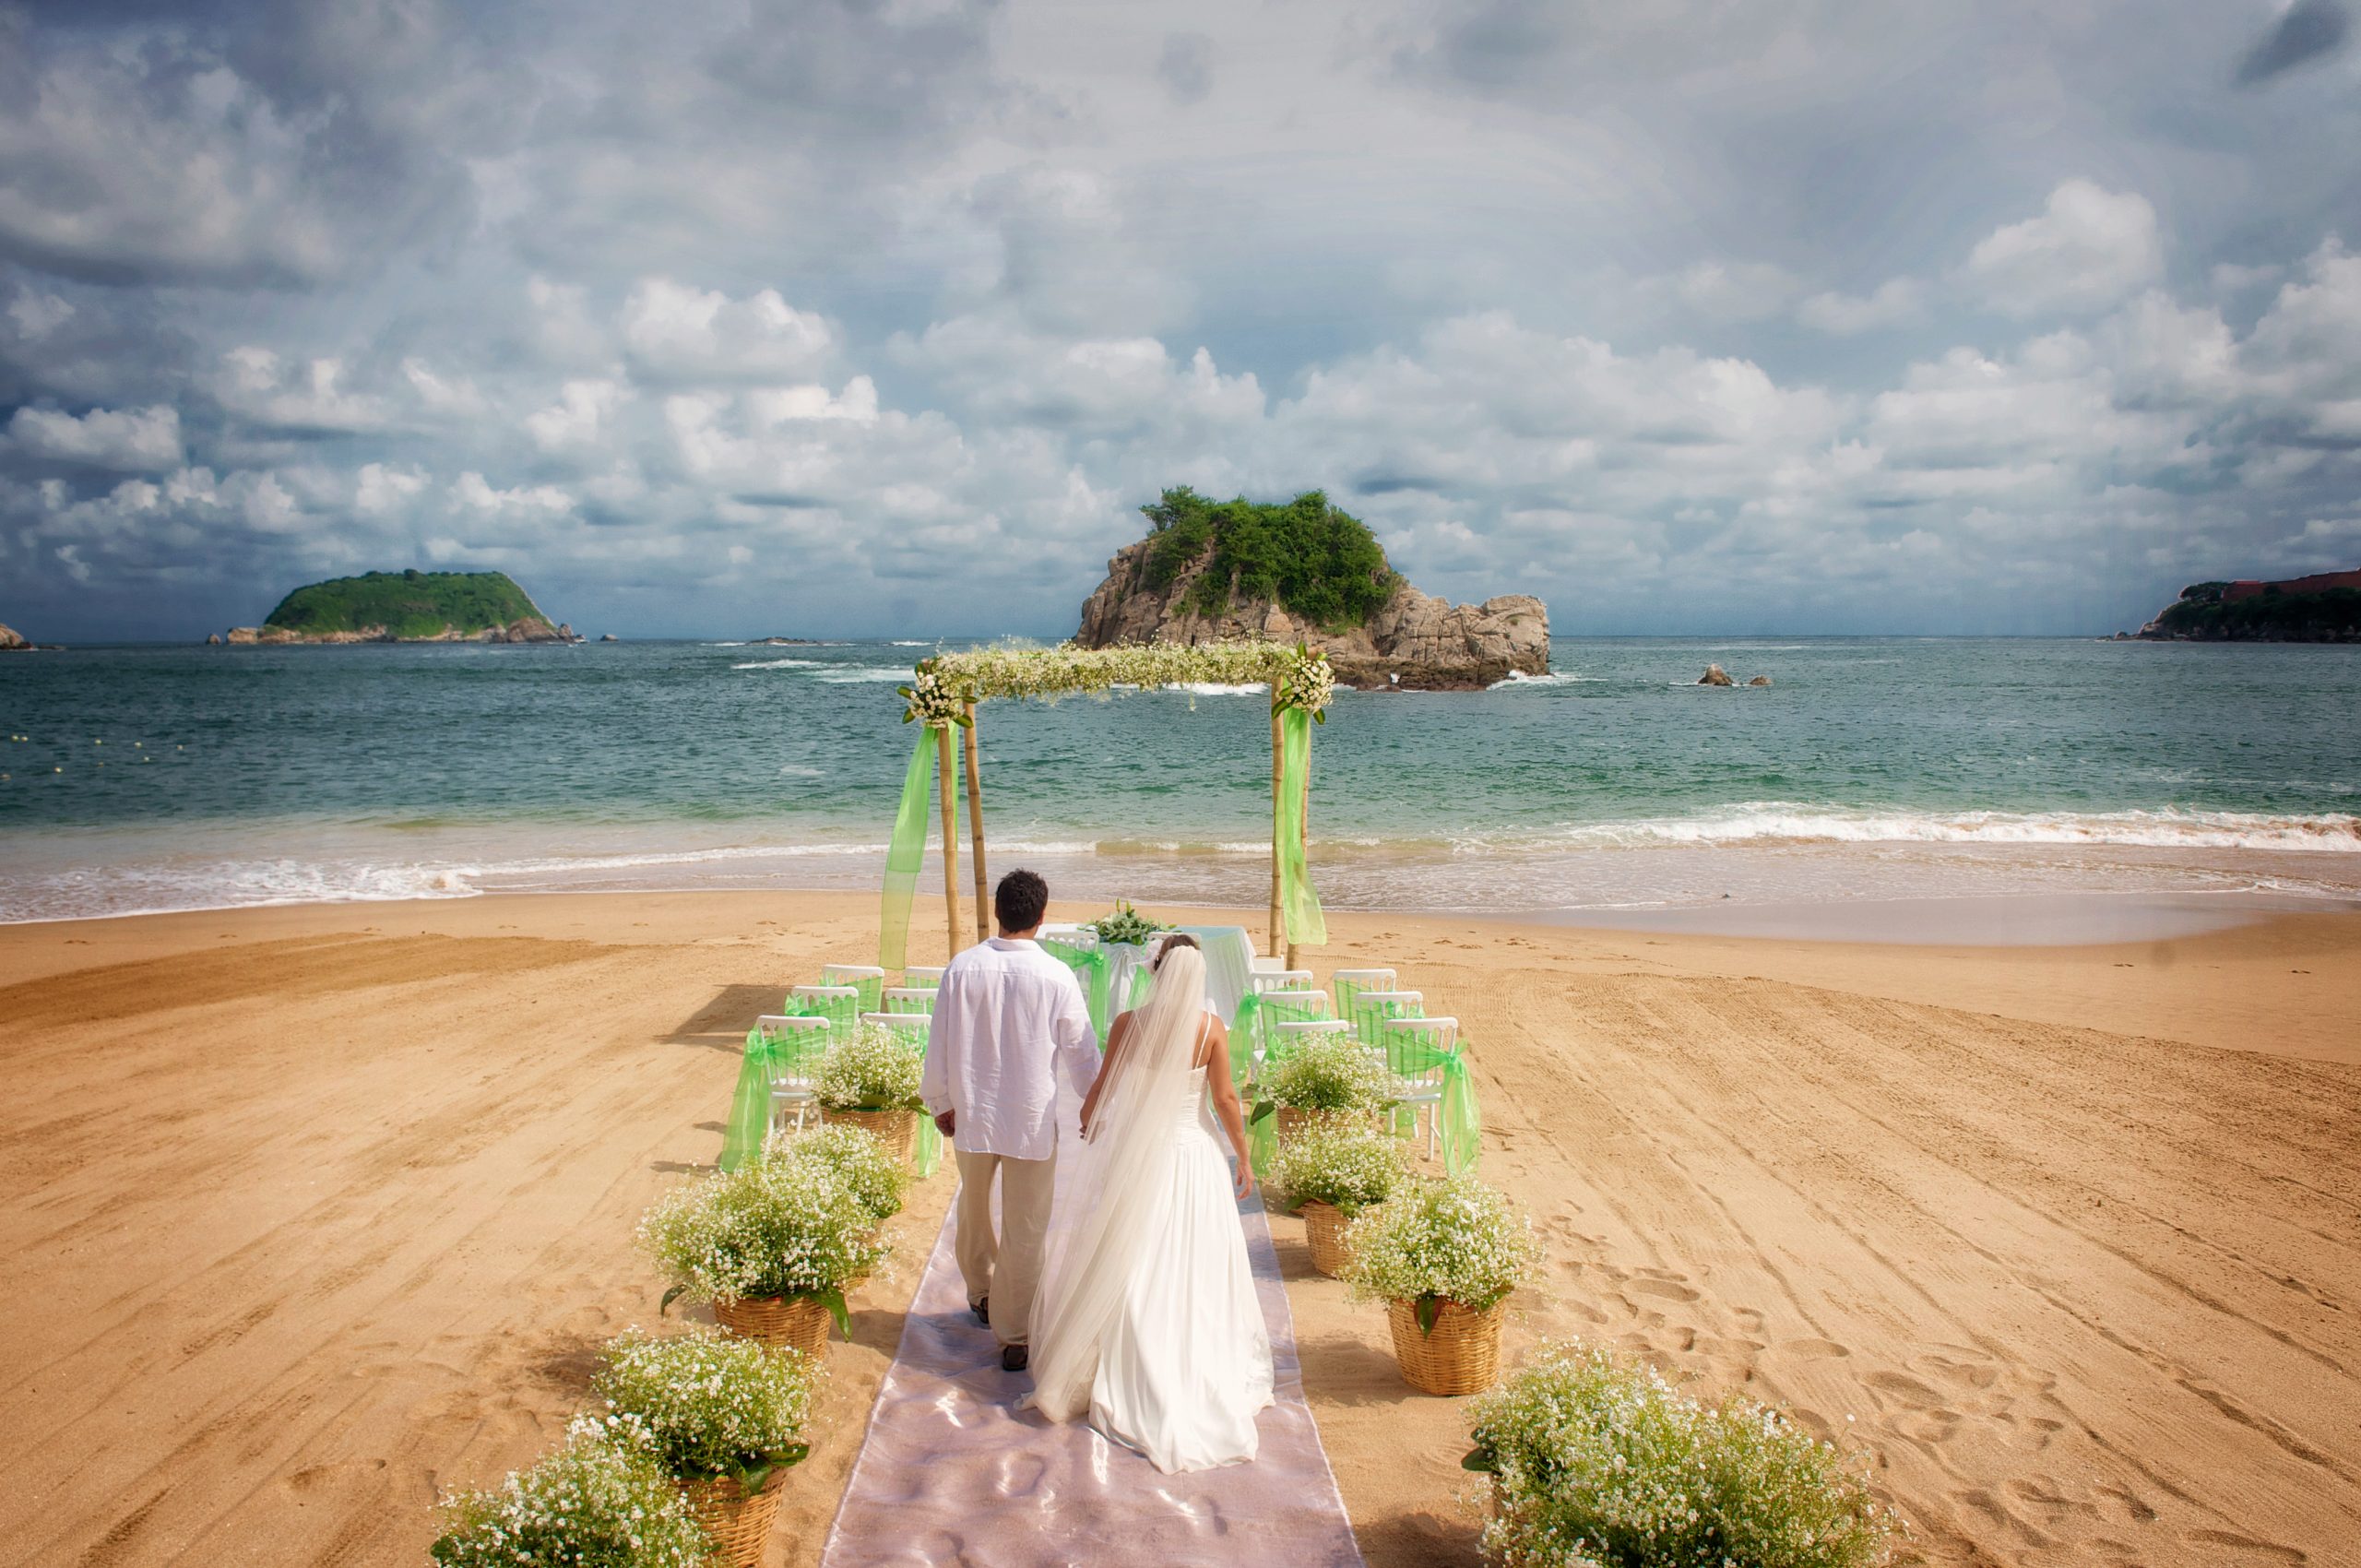 Barcelo Huatulco wedding packages